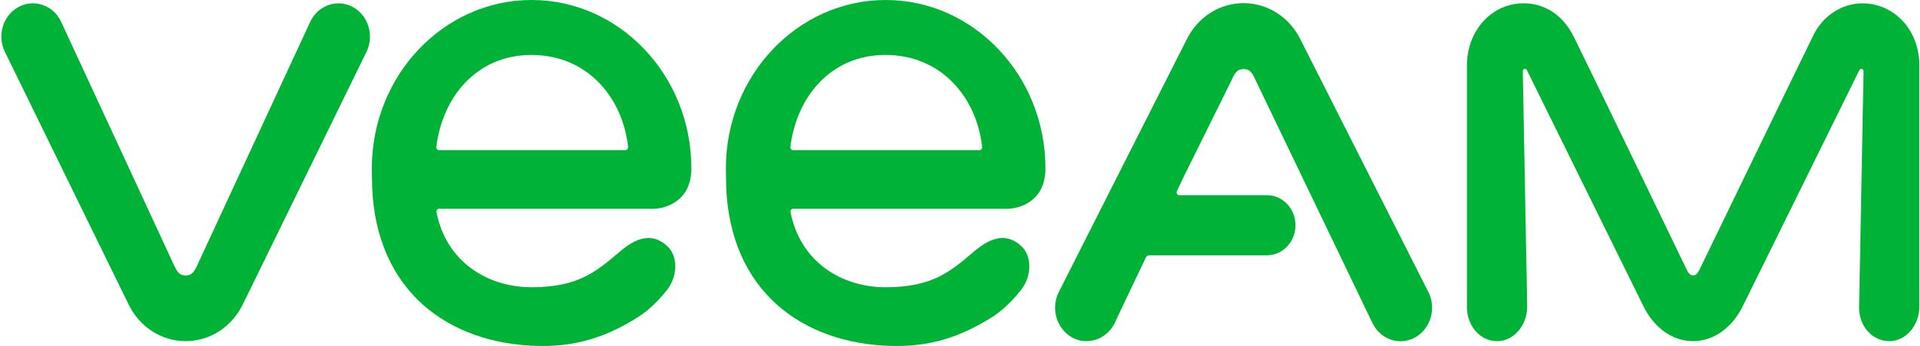 Veeam Data Platform Essentials Universal Subscription License. Includes Enterprise Plus Edition features. - 1 Year Renewal Subscription Upfront Billing & Production (24/7) Support. (V-ESSVUL-10-BE1AA-2S)